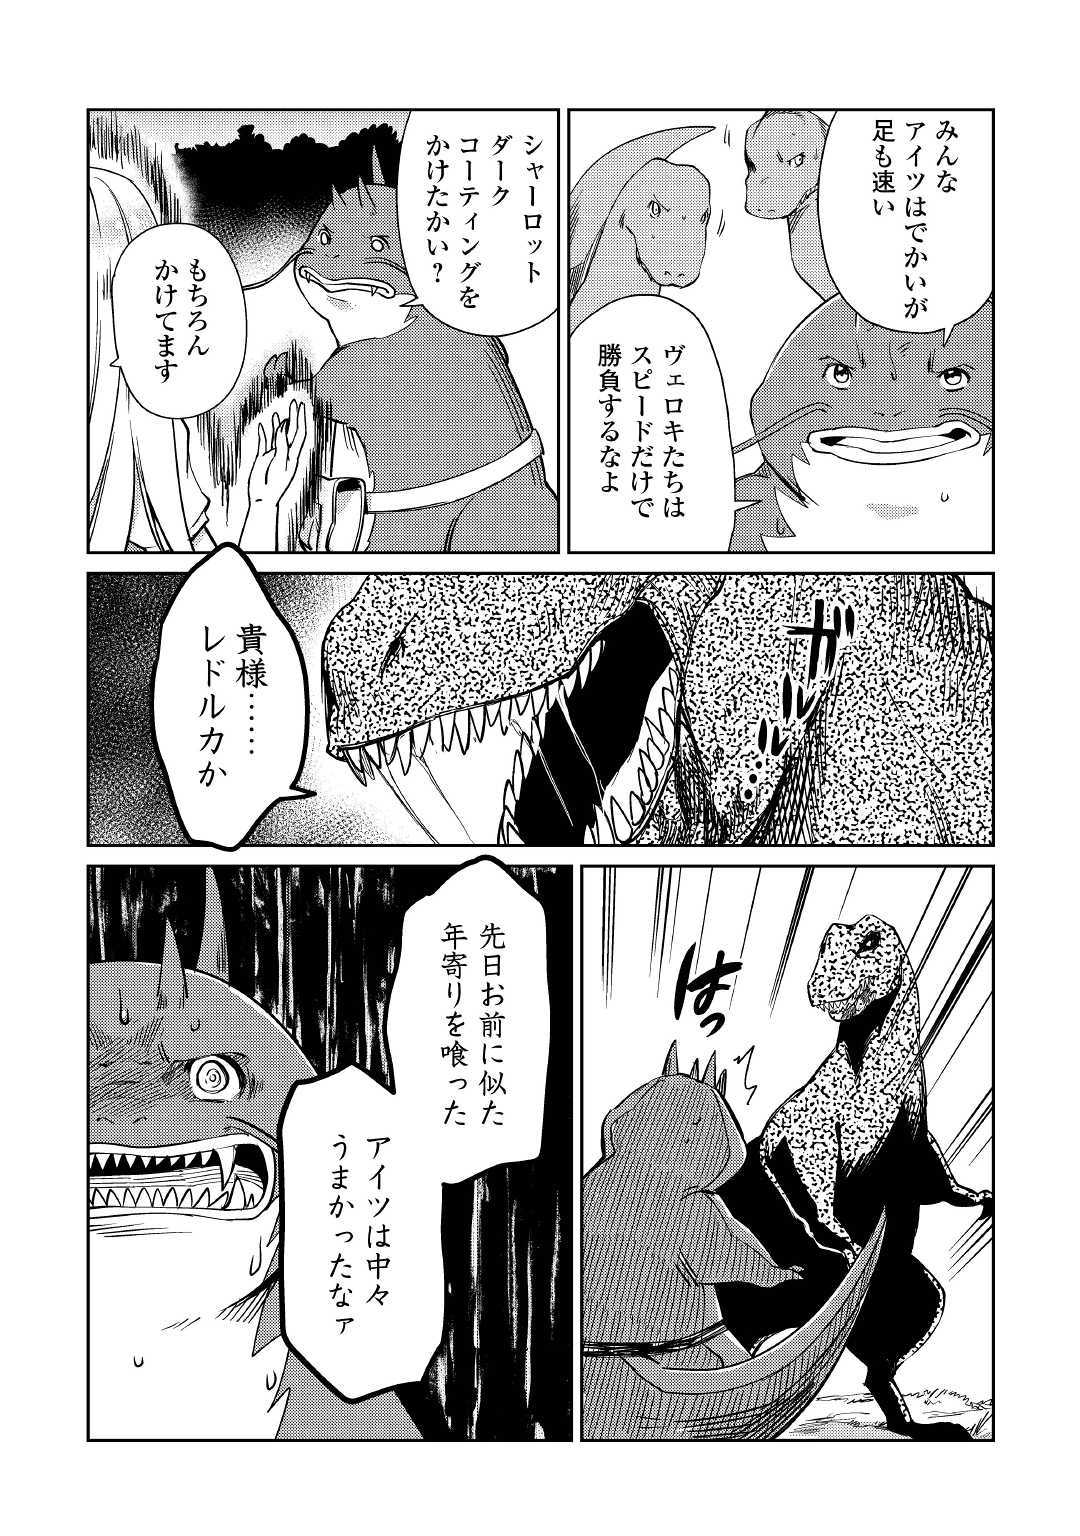 The Former Structural Researcher’s Story of Otherworldly Adventure 第16話 - Page 3